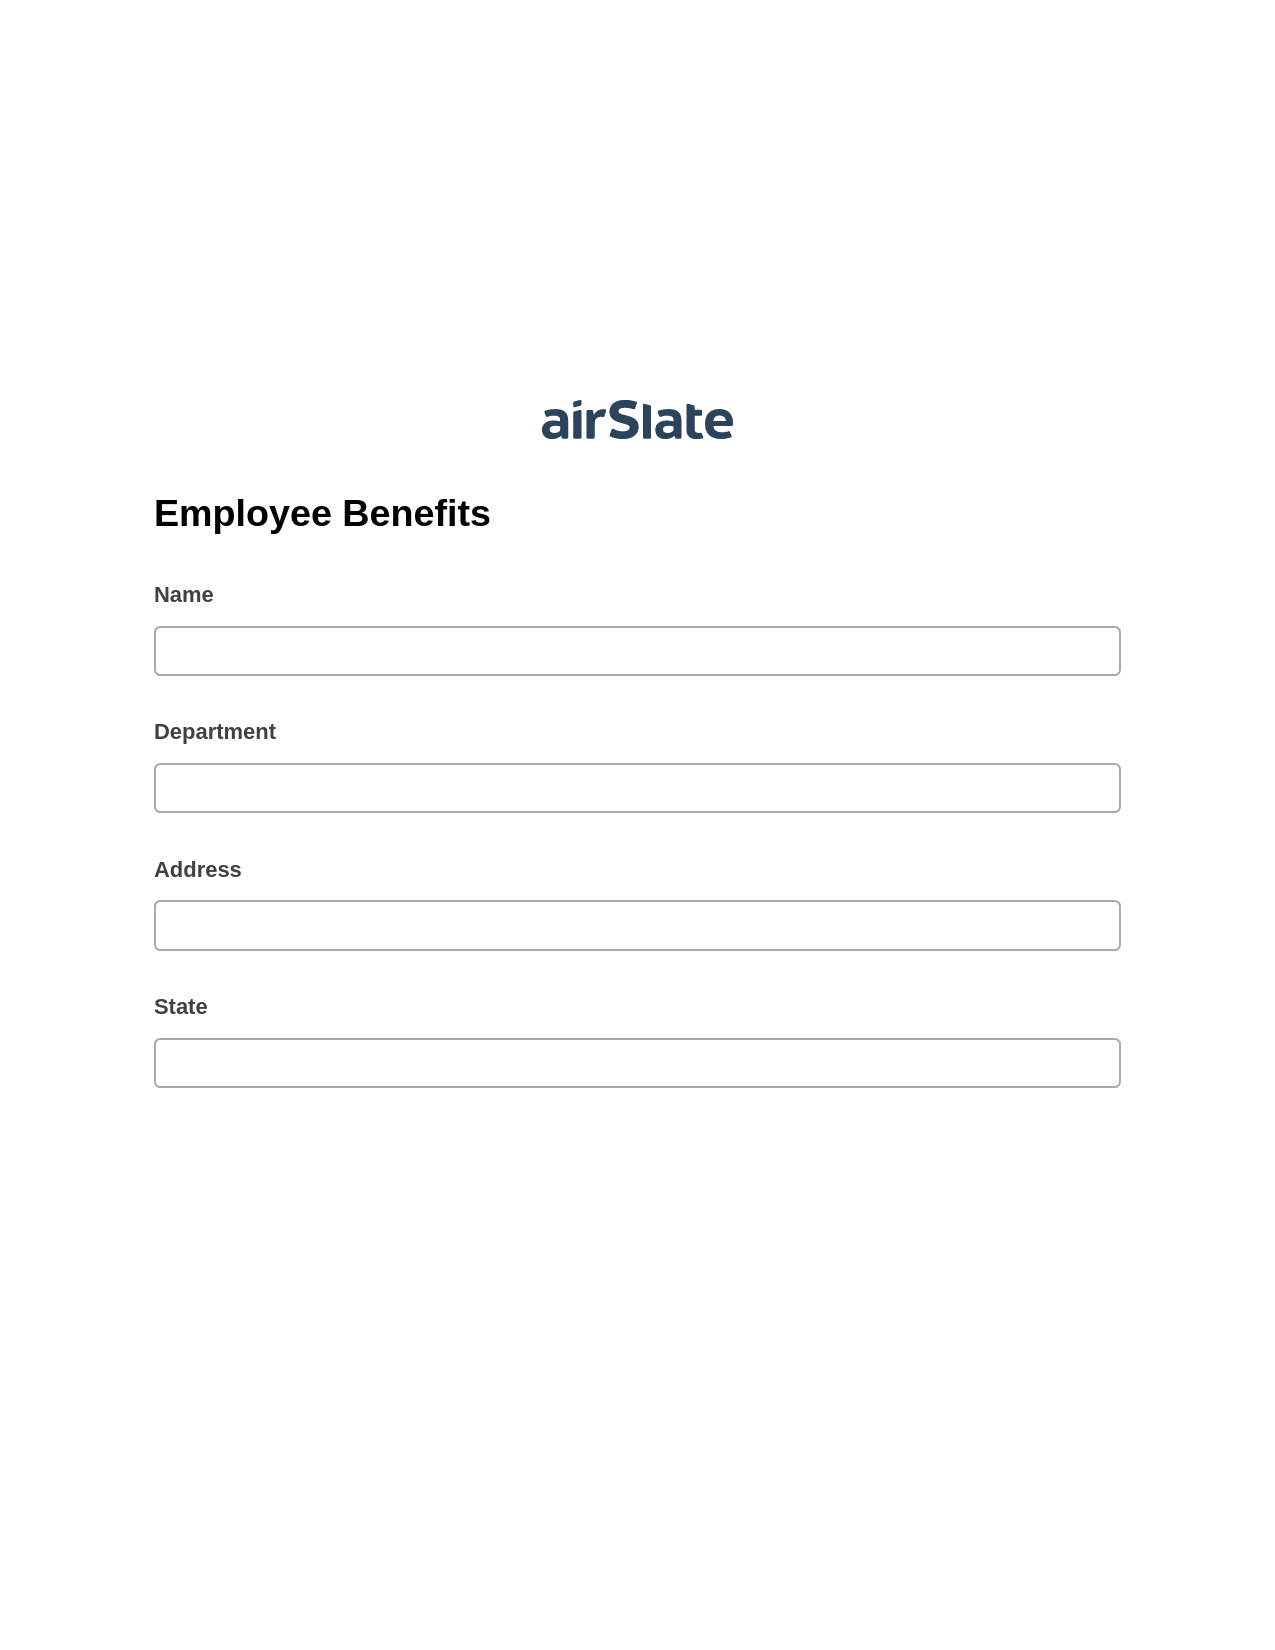 Employee Benefits Pre-fill from NetSuite Records Bot, Jira Bot, Email Notification Postfinish Bot